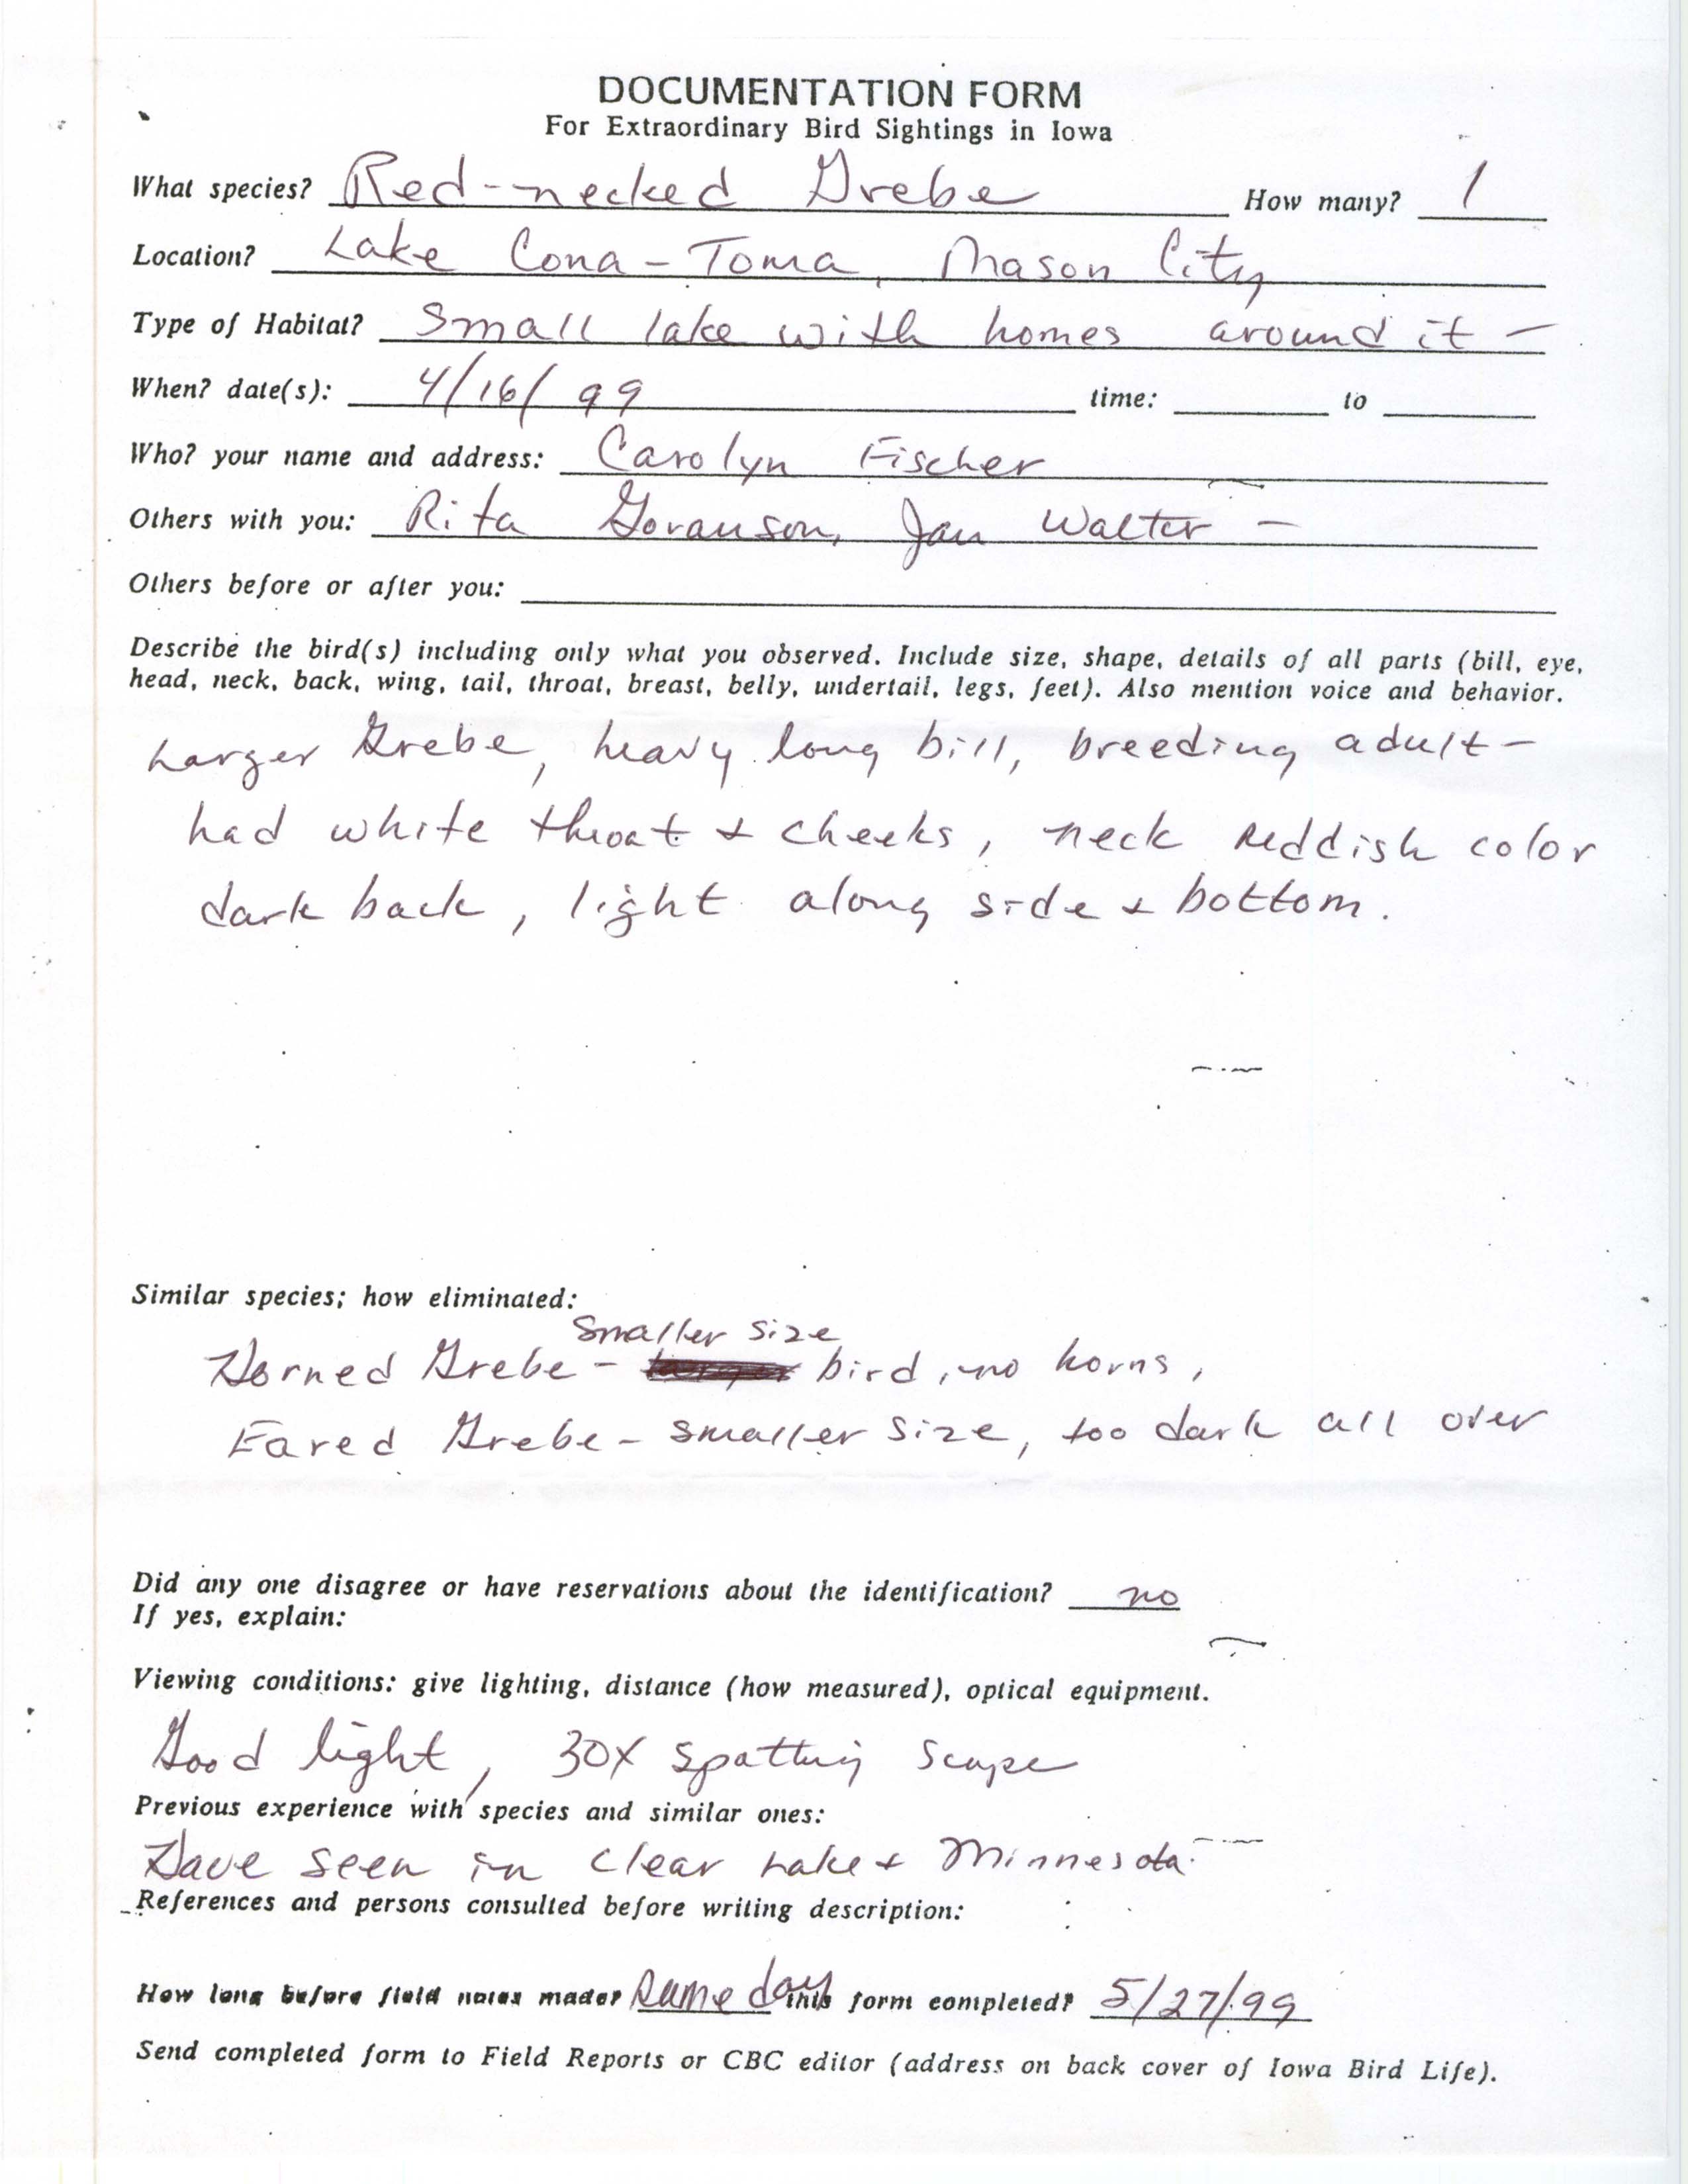 Rare bird documentation form for Red-necked Grebe at Lake Cona-Toma, 1999